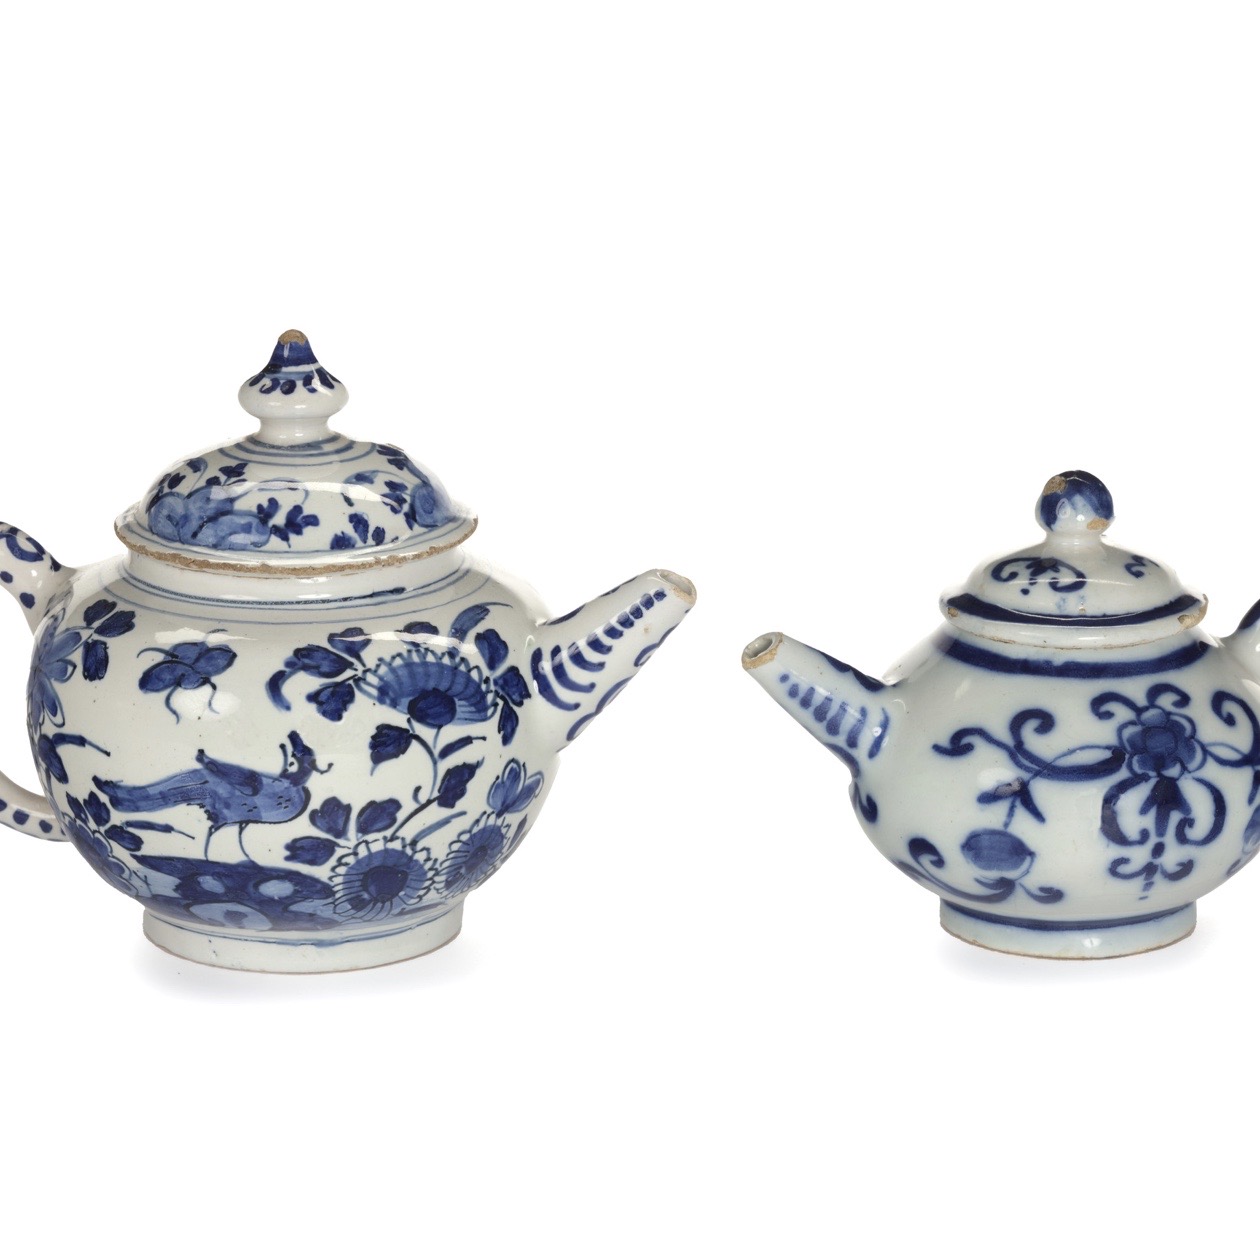 Two blue and white Delftware teapots, Object of the Month June 2023